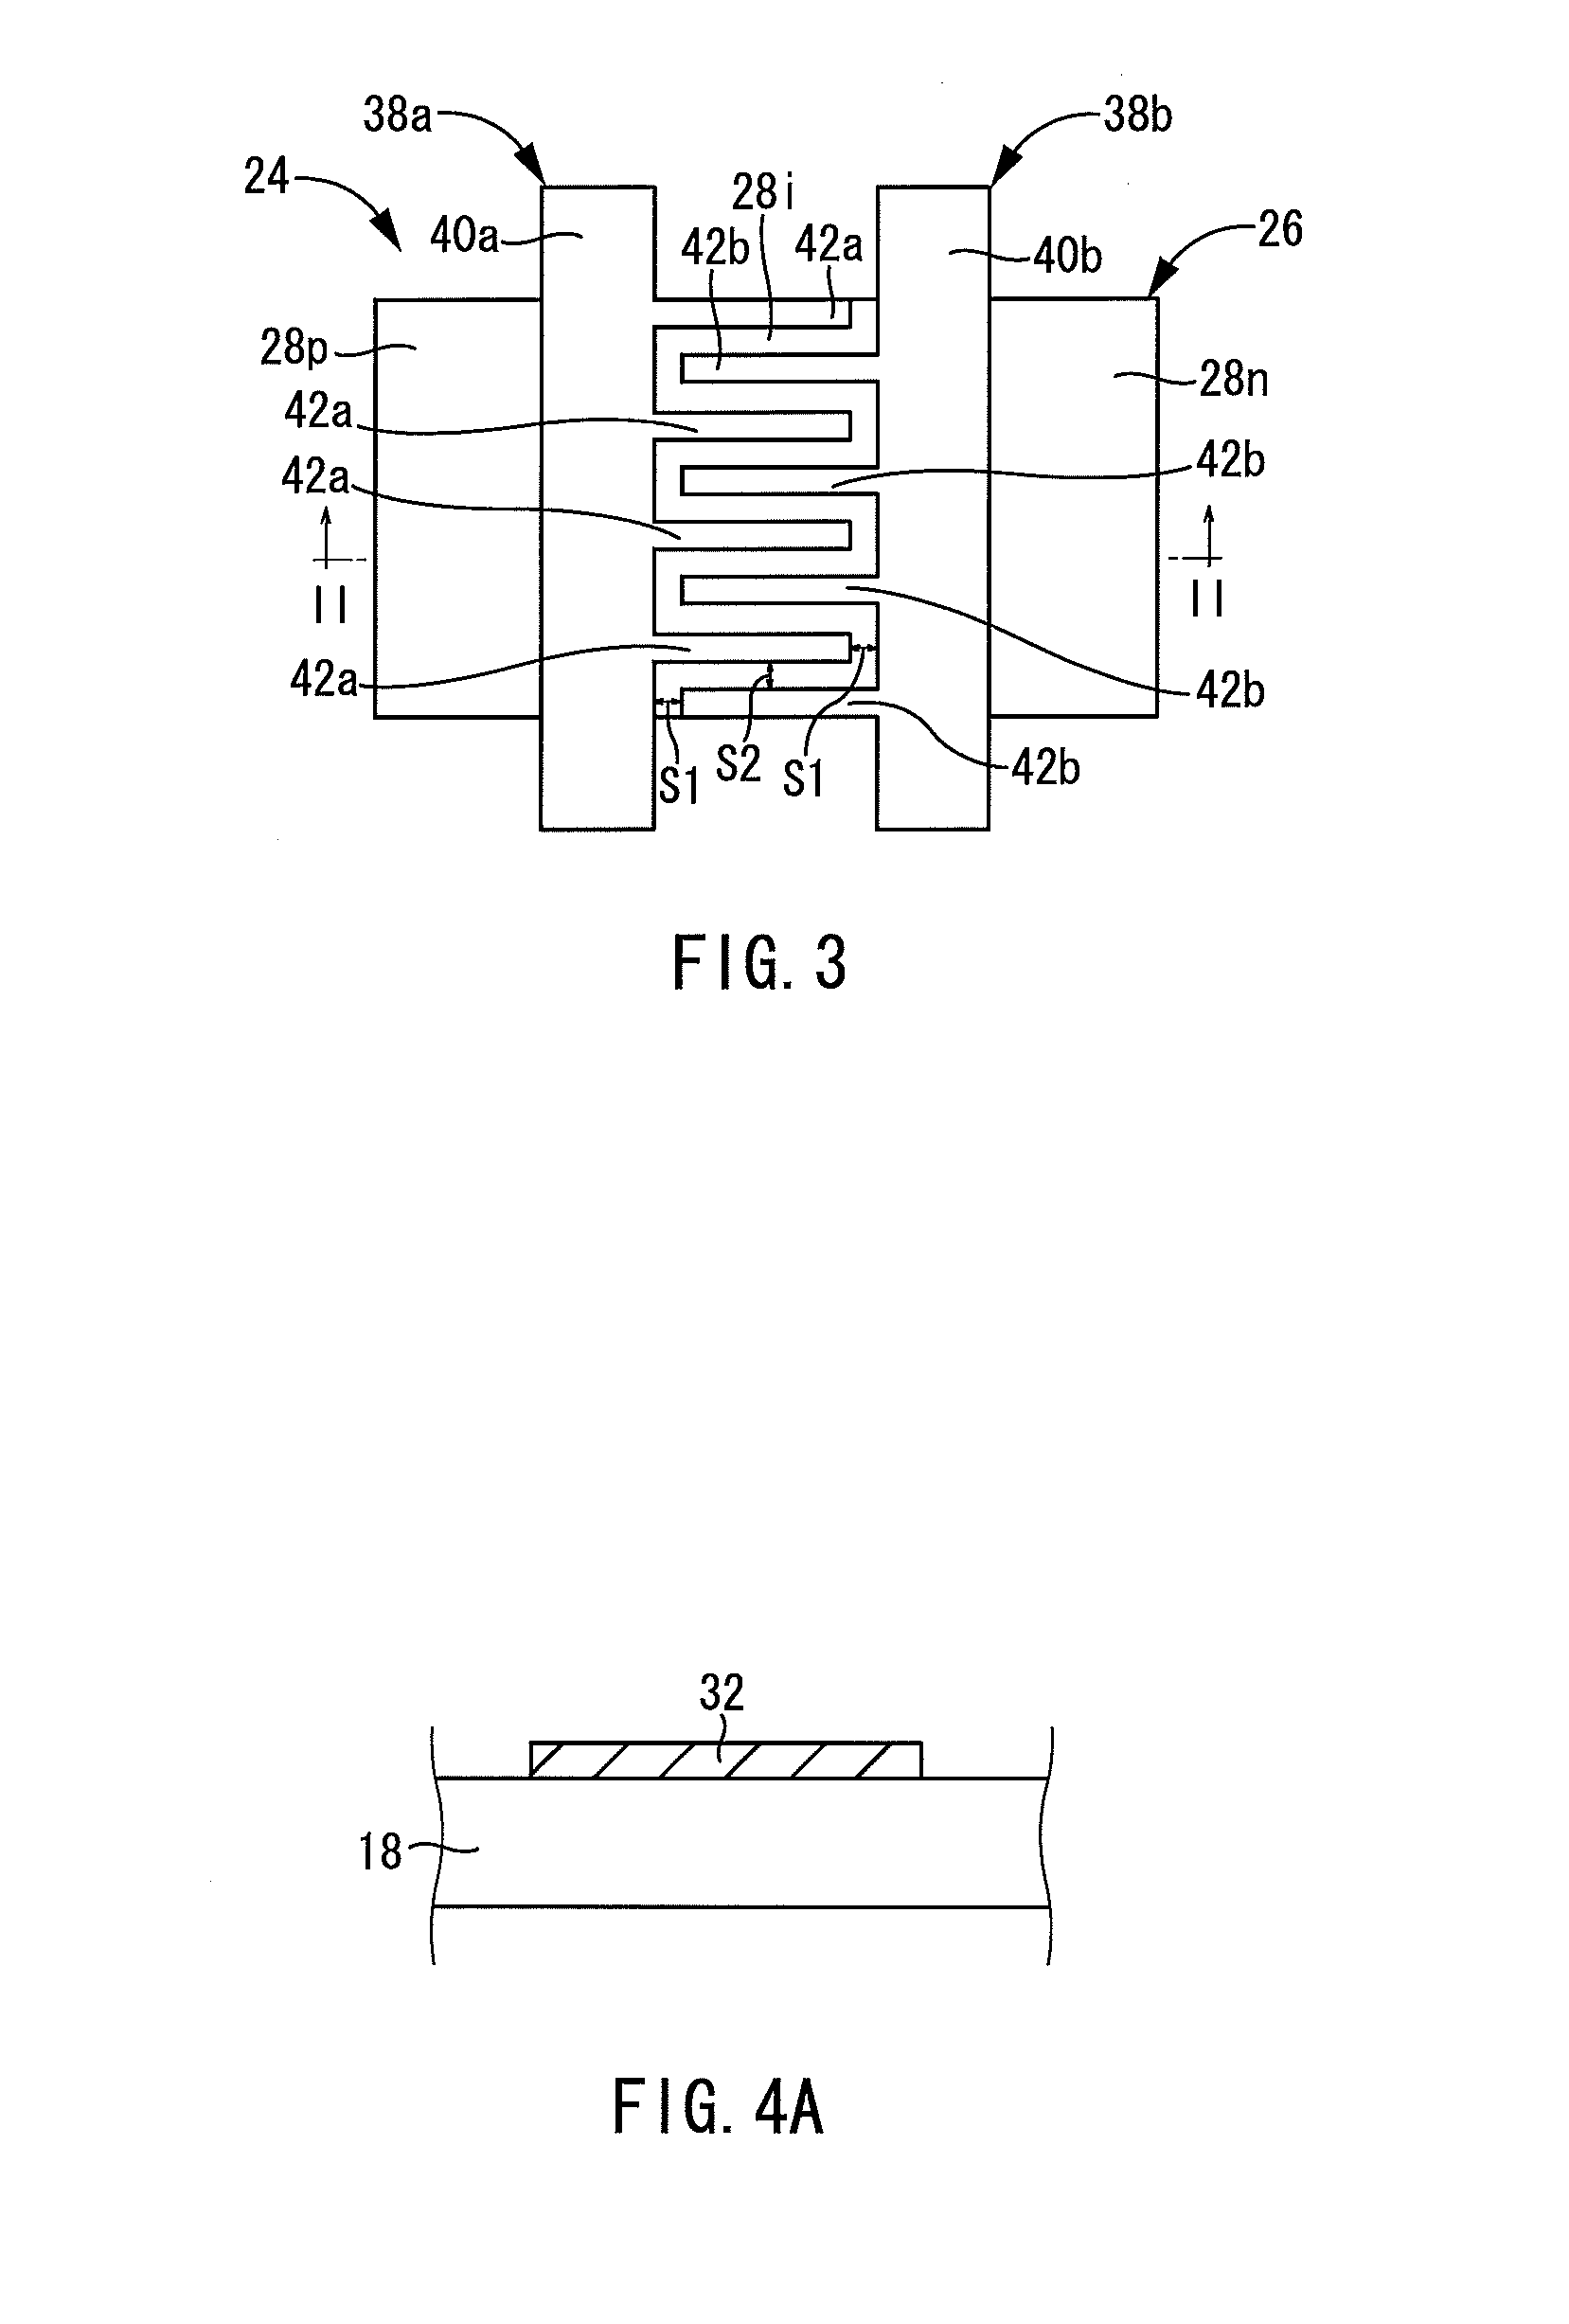 Optical sensor comprising a photodiode having a p-type semiconductor region, an intrinsic semiconductor region, and an n-type semiconductor region